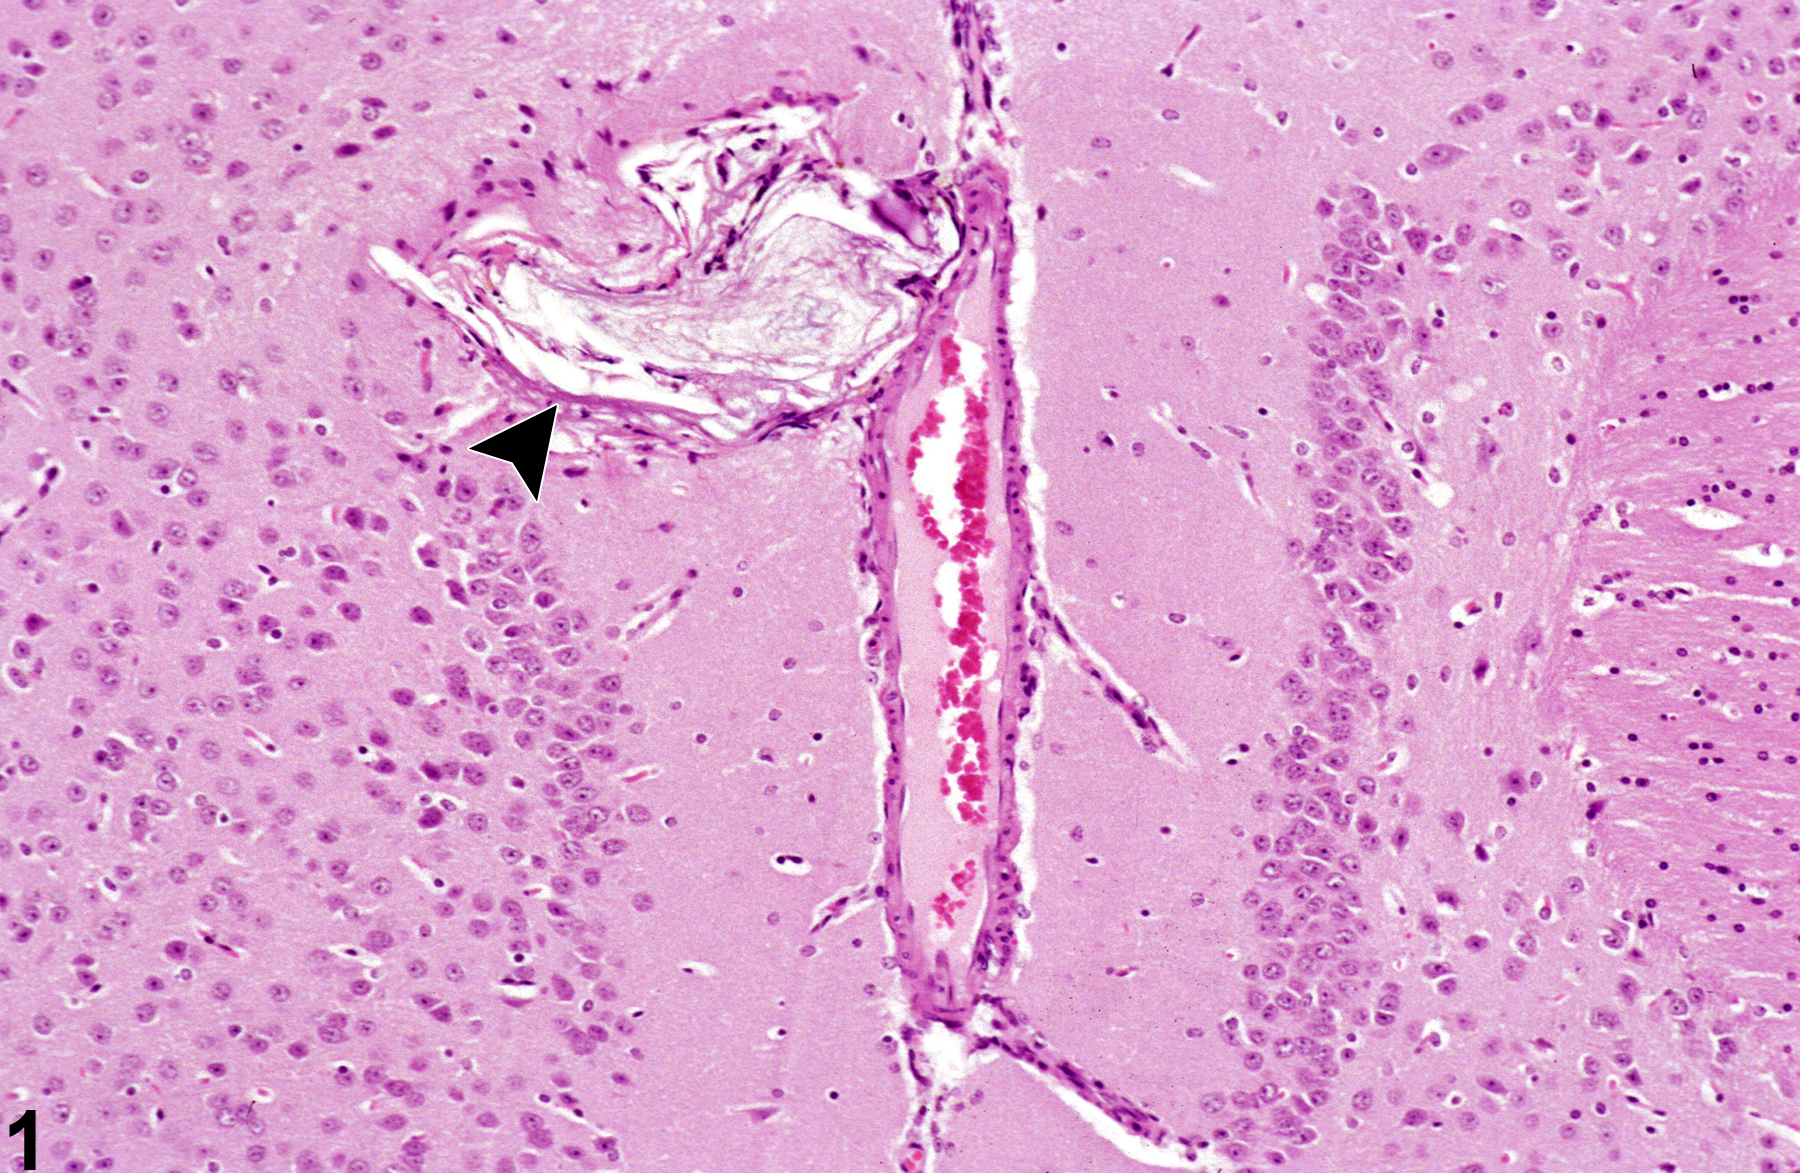 Image of epidermoid cyst in the brain from a male B6C3F1 mouse in a chronic study